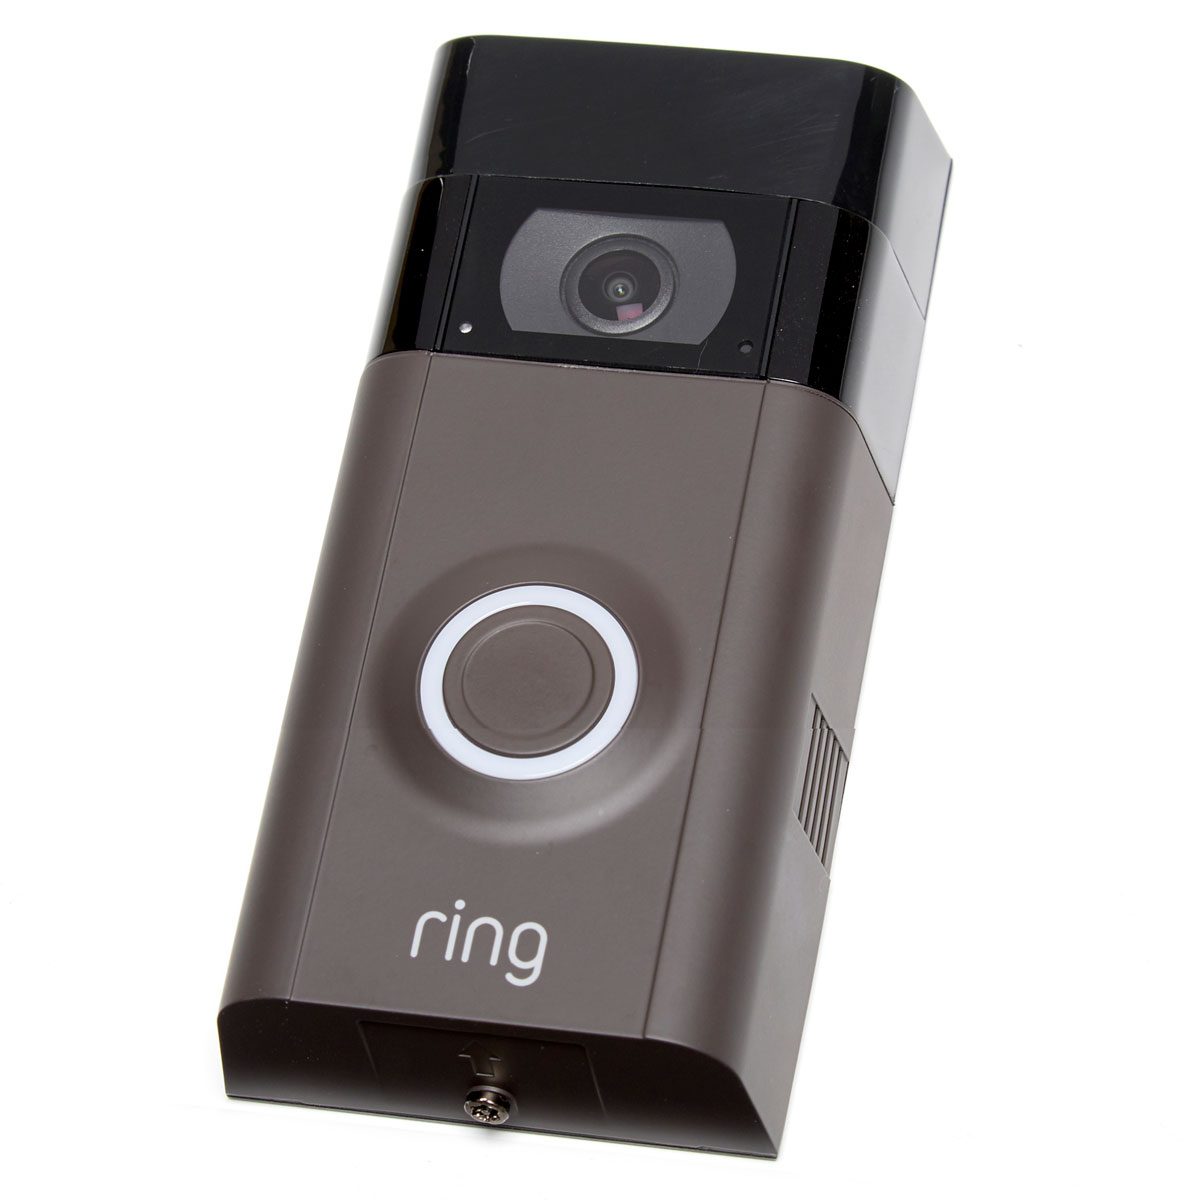 where can you buy ring doorbell